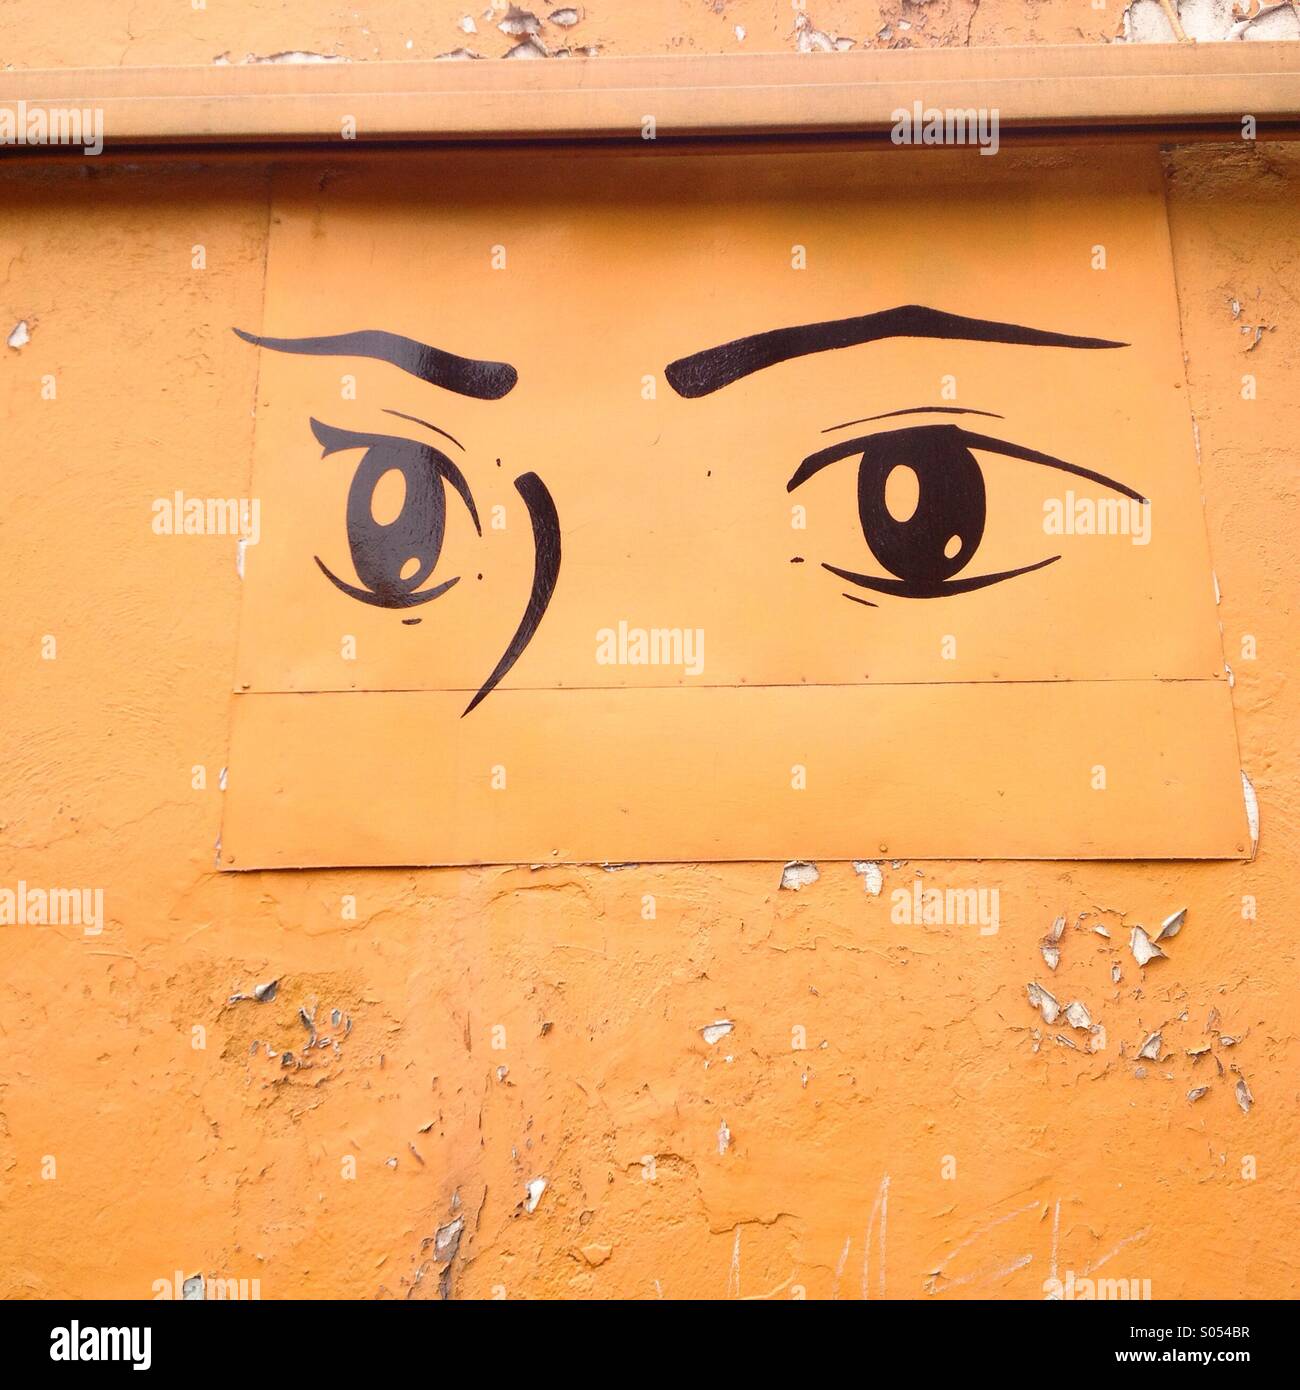 A painting of two eyes decorates an orange wall in Mexico City, Mexico Stock Photo